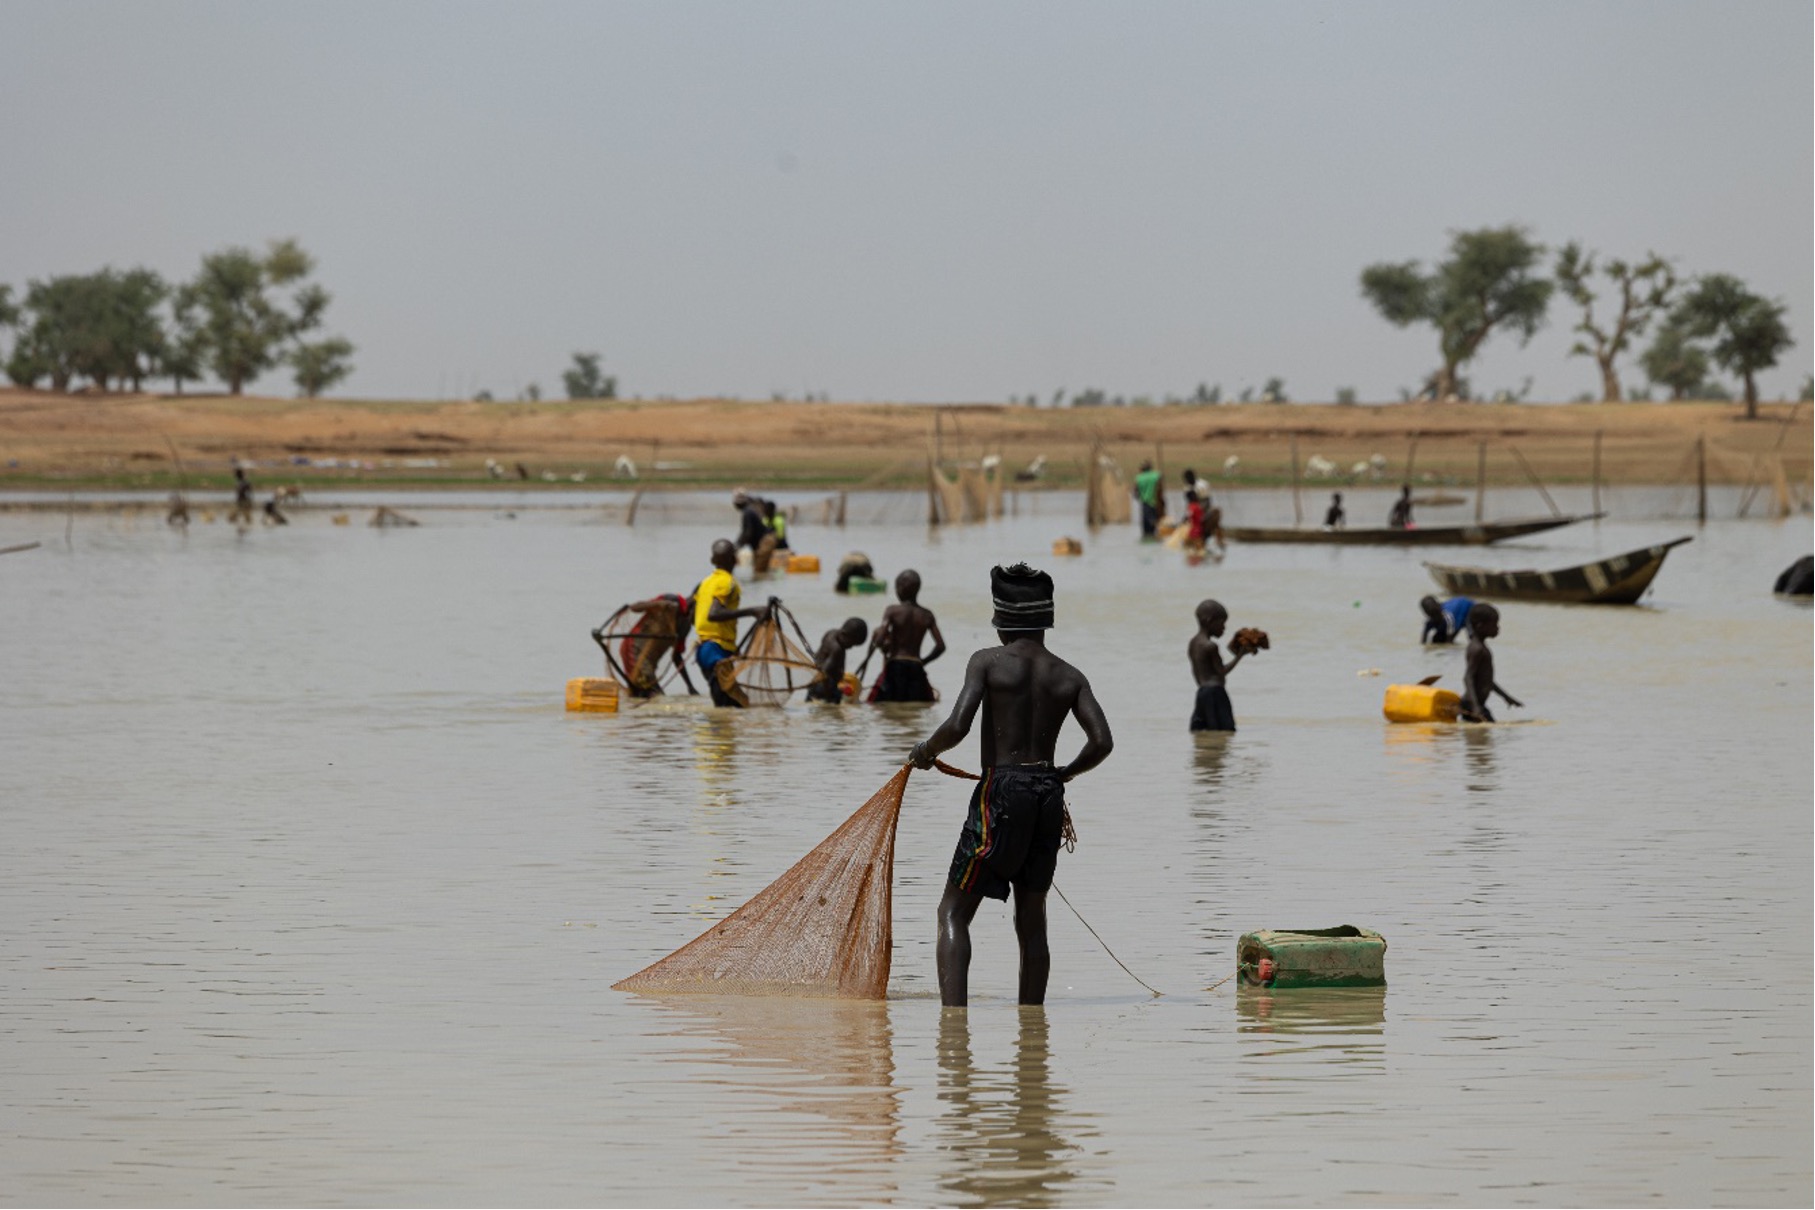 Photo: Children learning to fish in the river during the recession